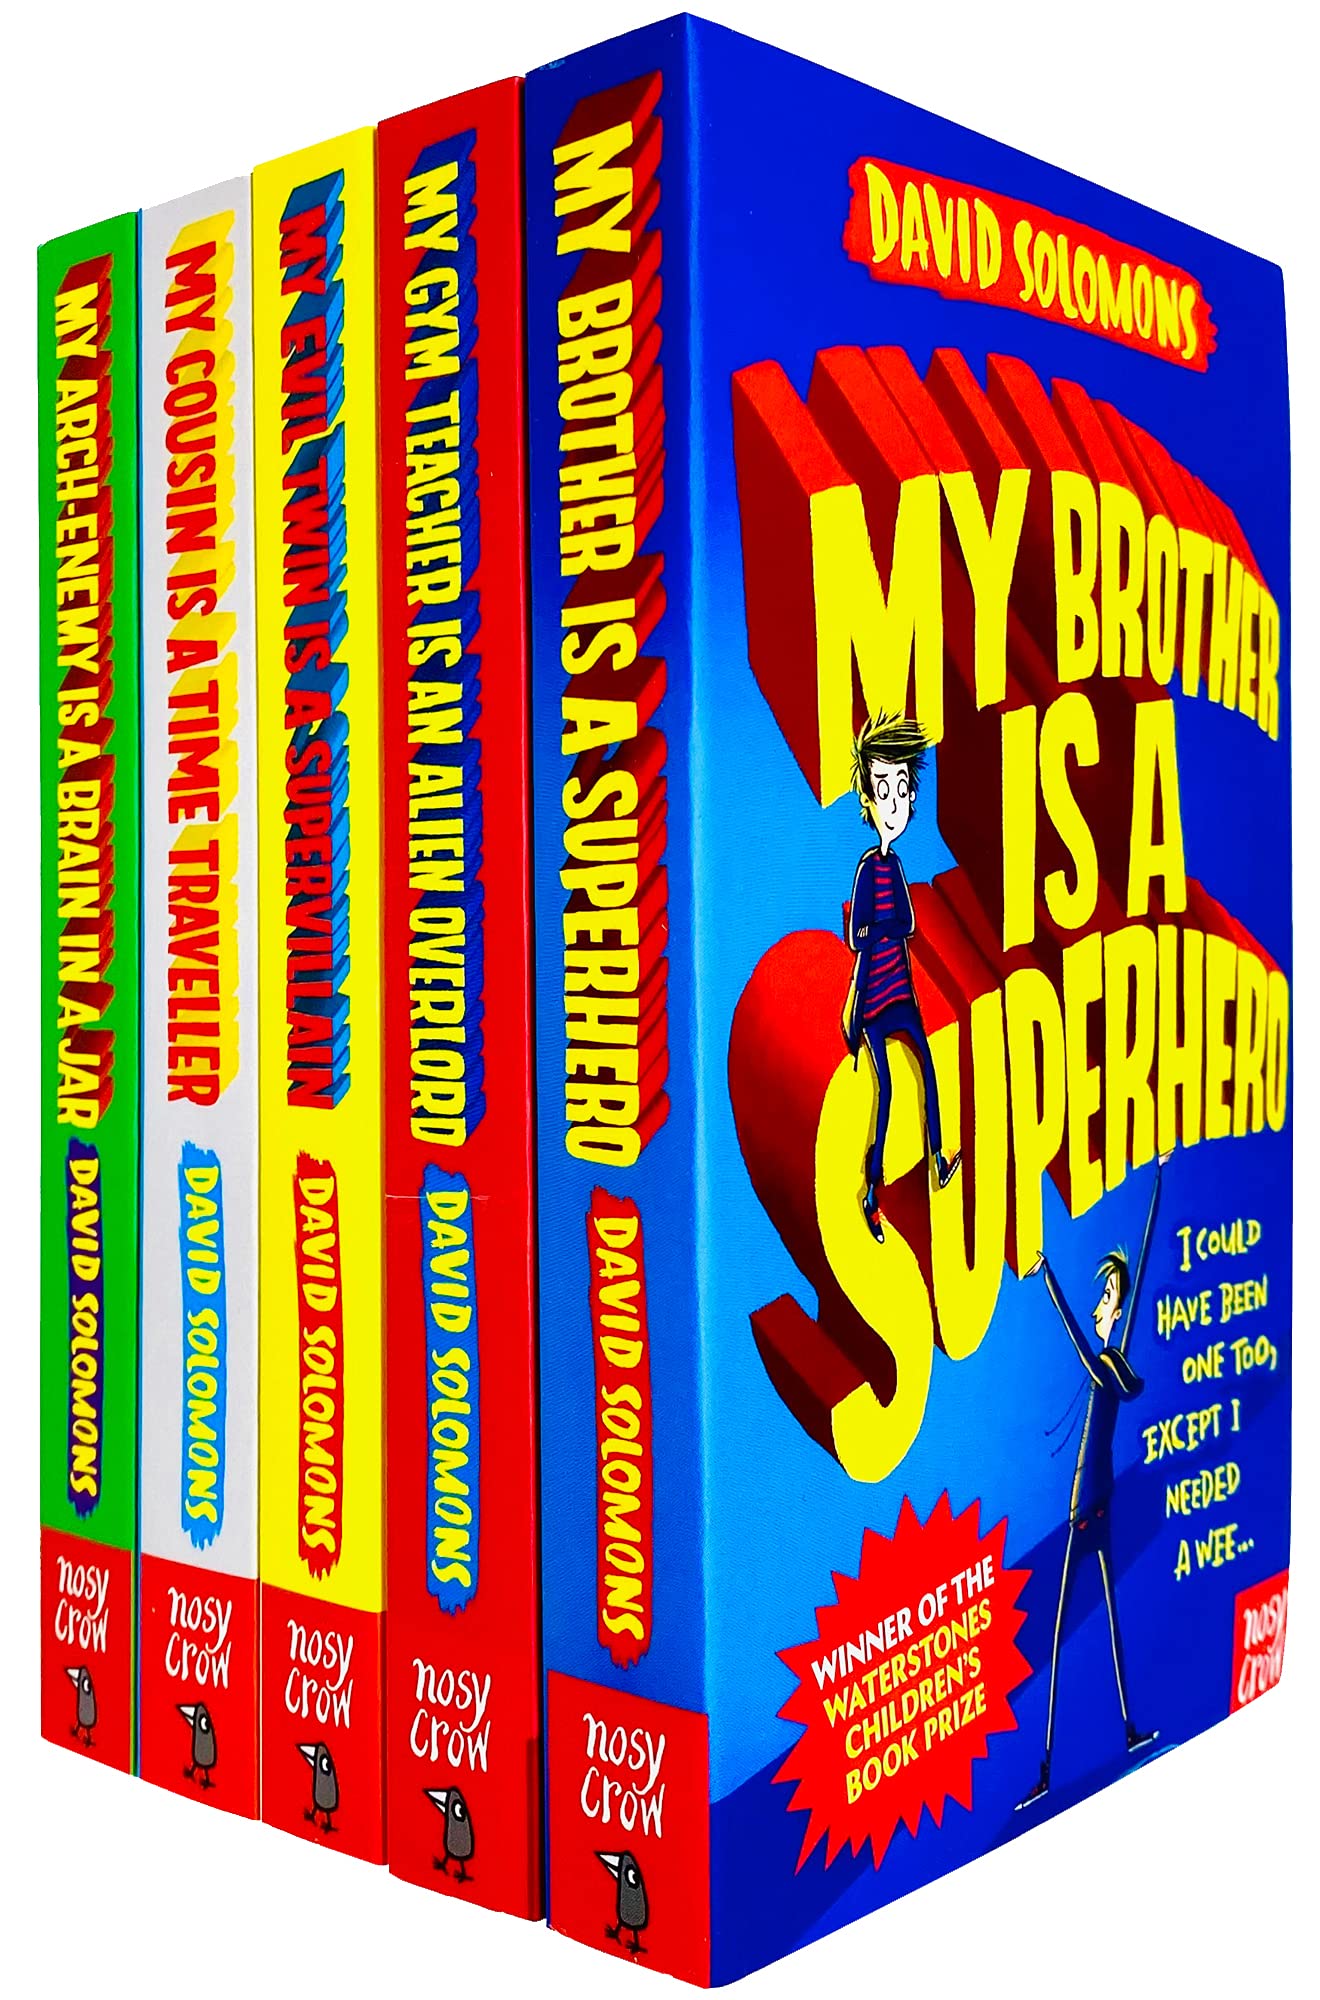 My Brother Is a Superhero Series Books 1 - 5 Collection Set by David Solomons Paperback - Lets Buy Books